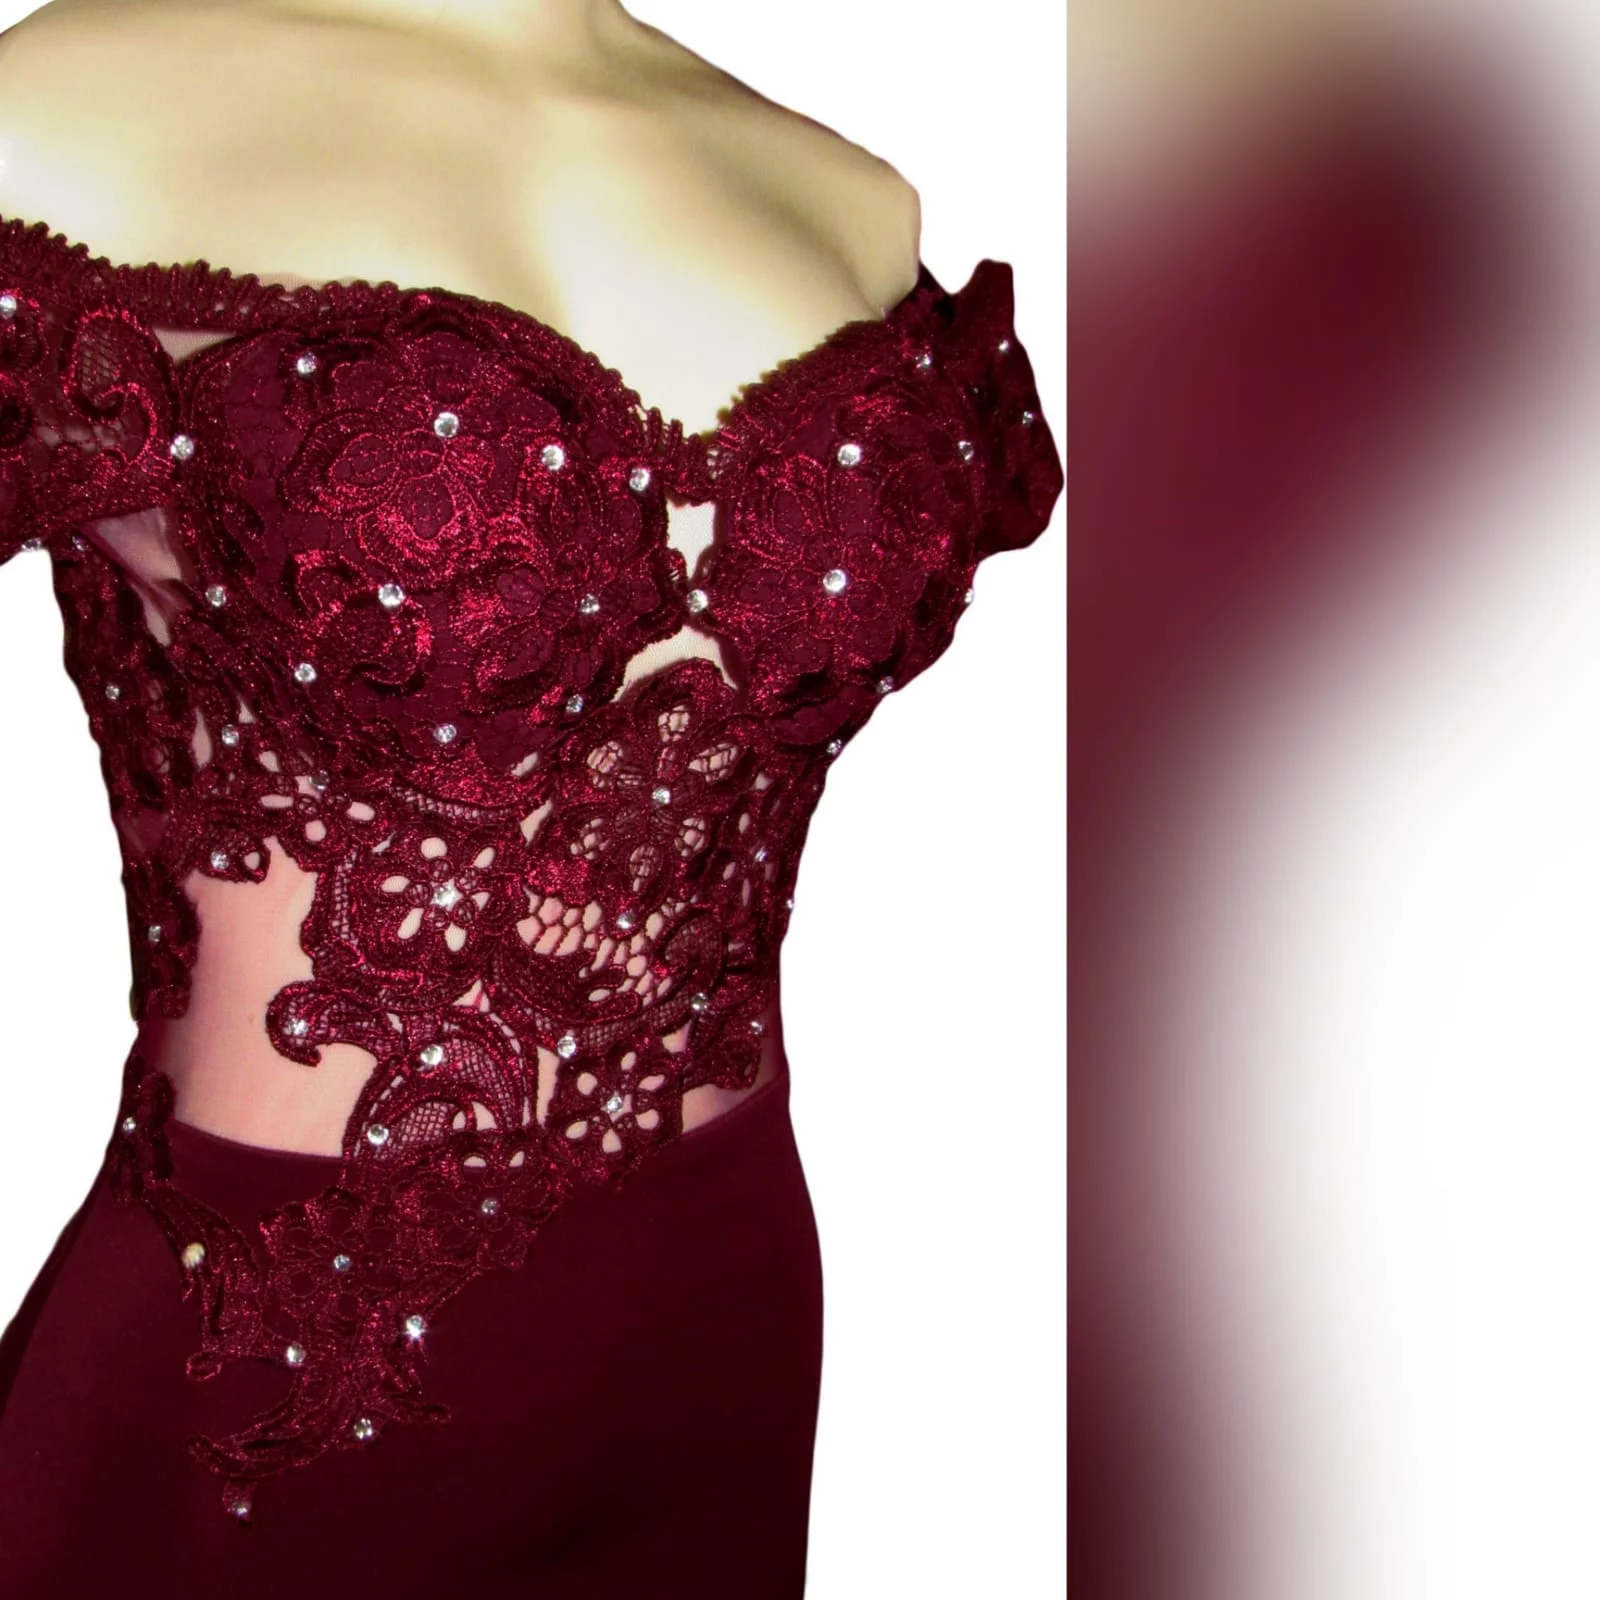 Burgundy off shoulder long matric dance dress 4 burgundy off shoulder long matric dance dress. With an illusion bodice detailed with lace and beads and off-shoulder short sleeves. Bottom fitted till hip, with a high slit and a train for a touch of sexy and drama.